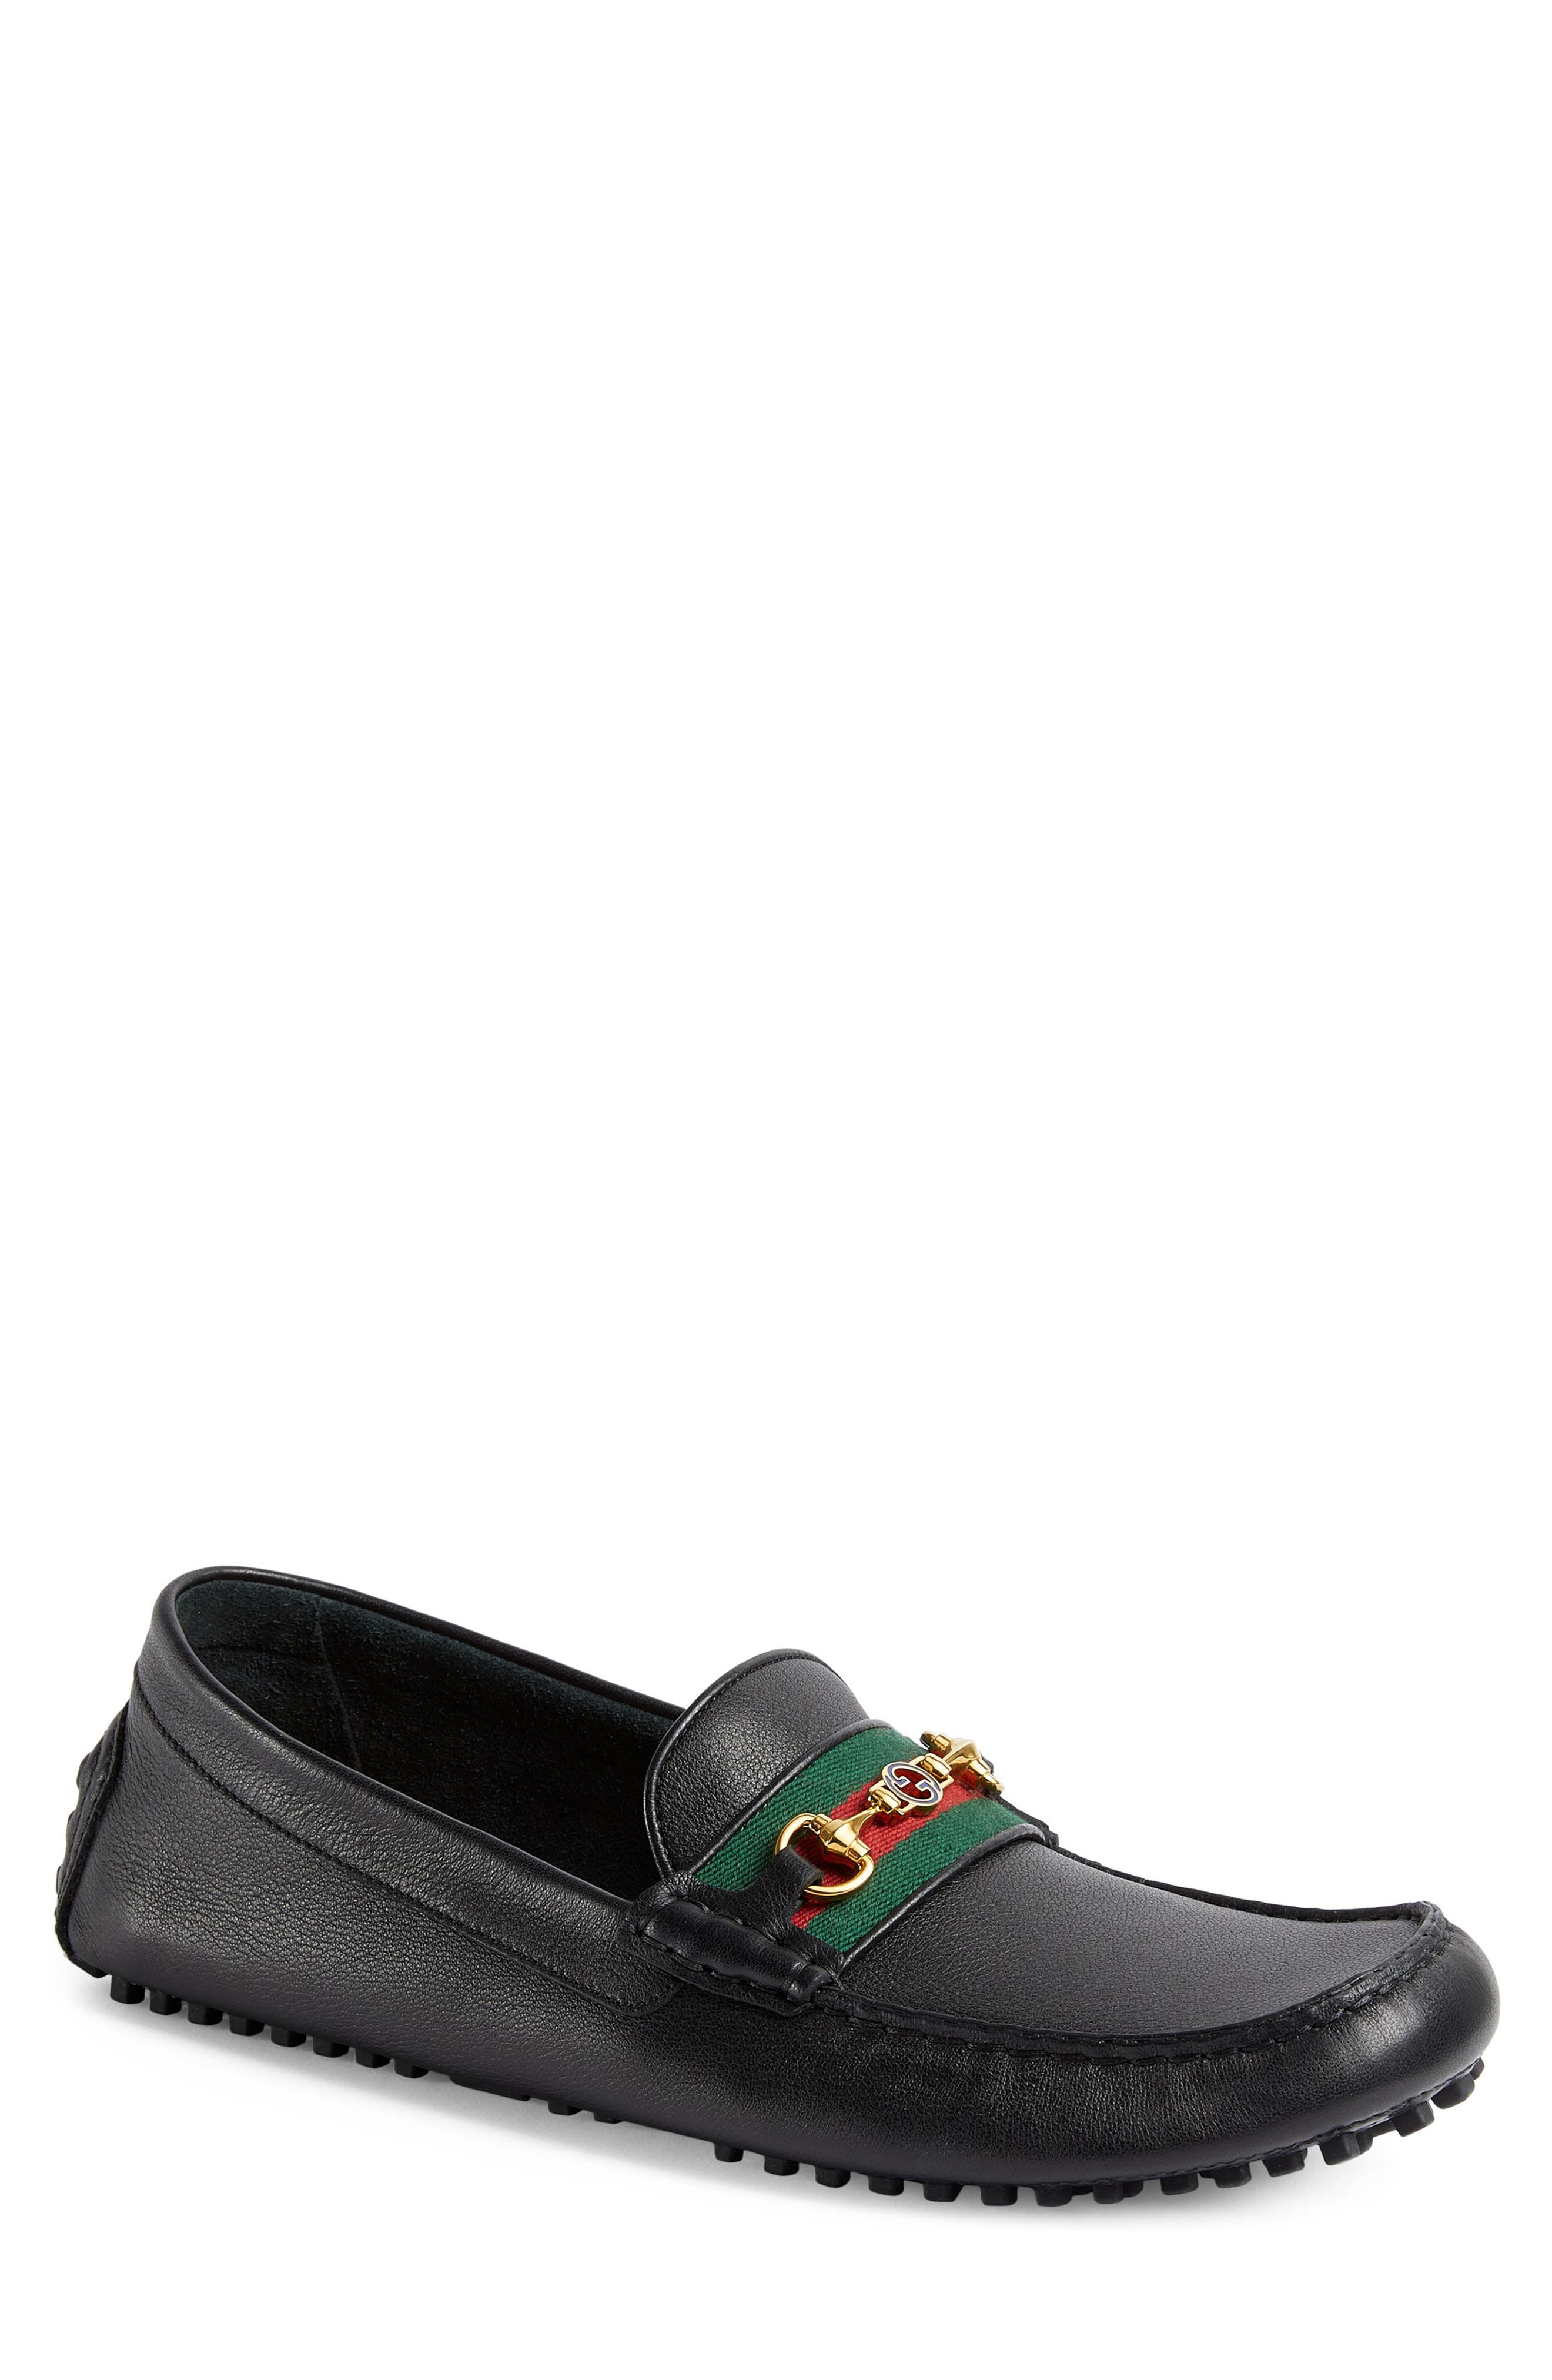 gucci loafers nordstrom